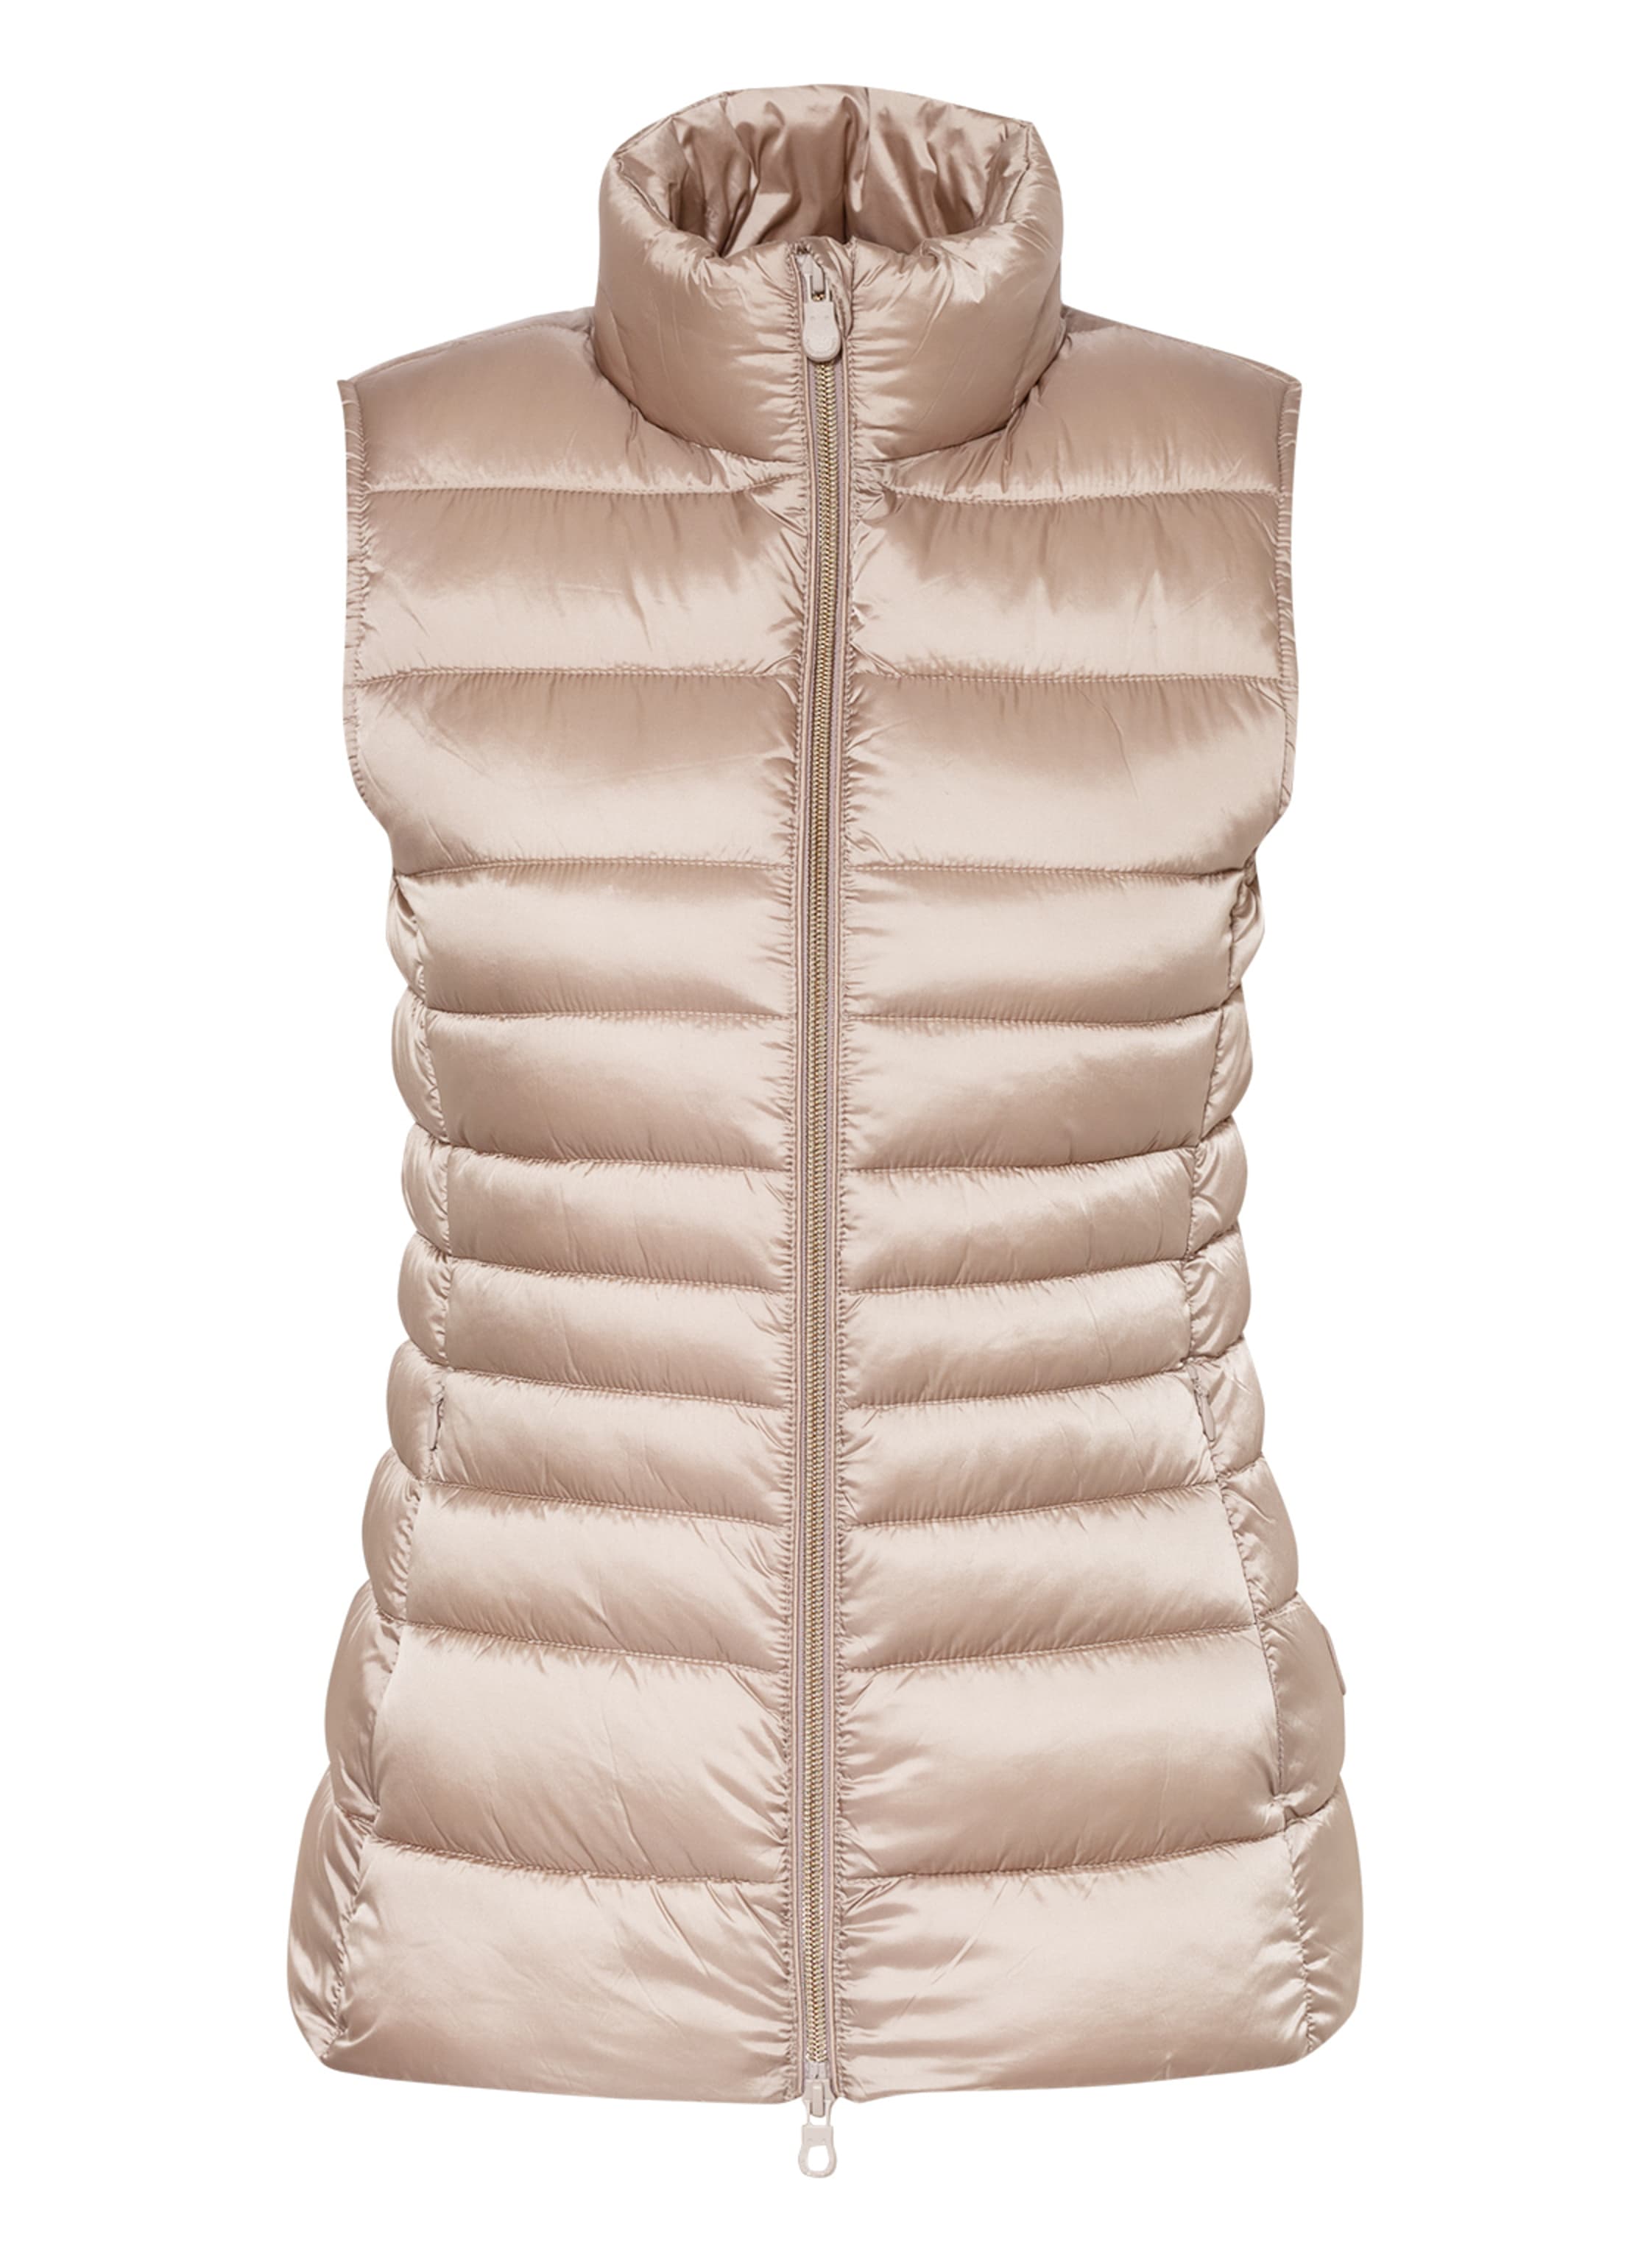 SAVE THE DUCK Quilted vest IRIS LYNN in taupe | Breuninger